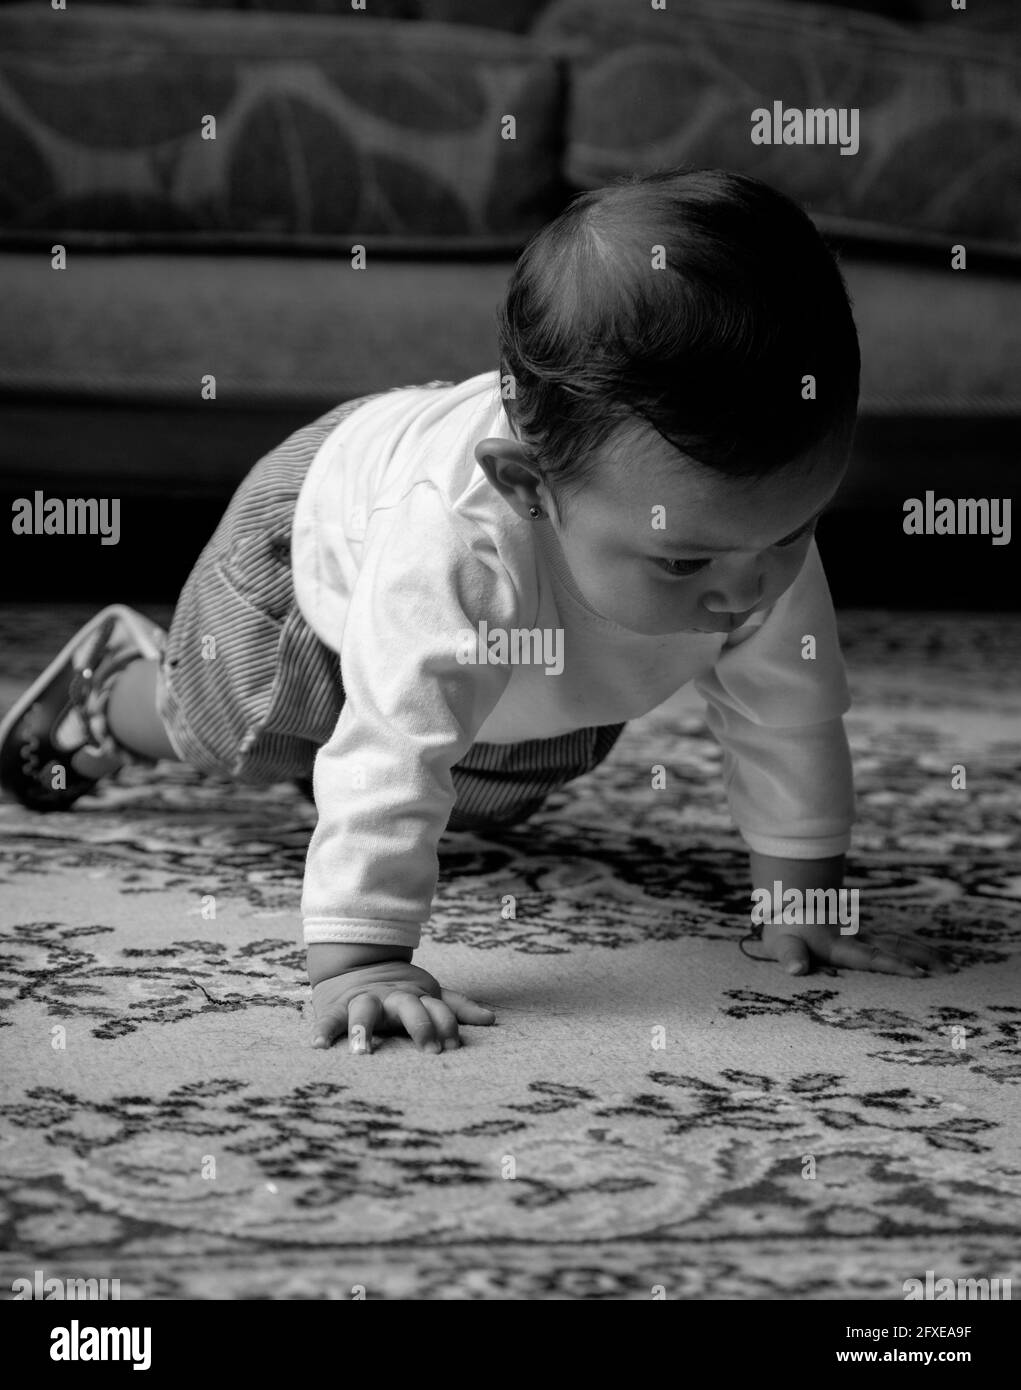 adorable little latin toddler, crawling on textured rug, wears casual clothes in studio, black and white photo Stock Photo